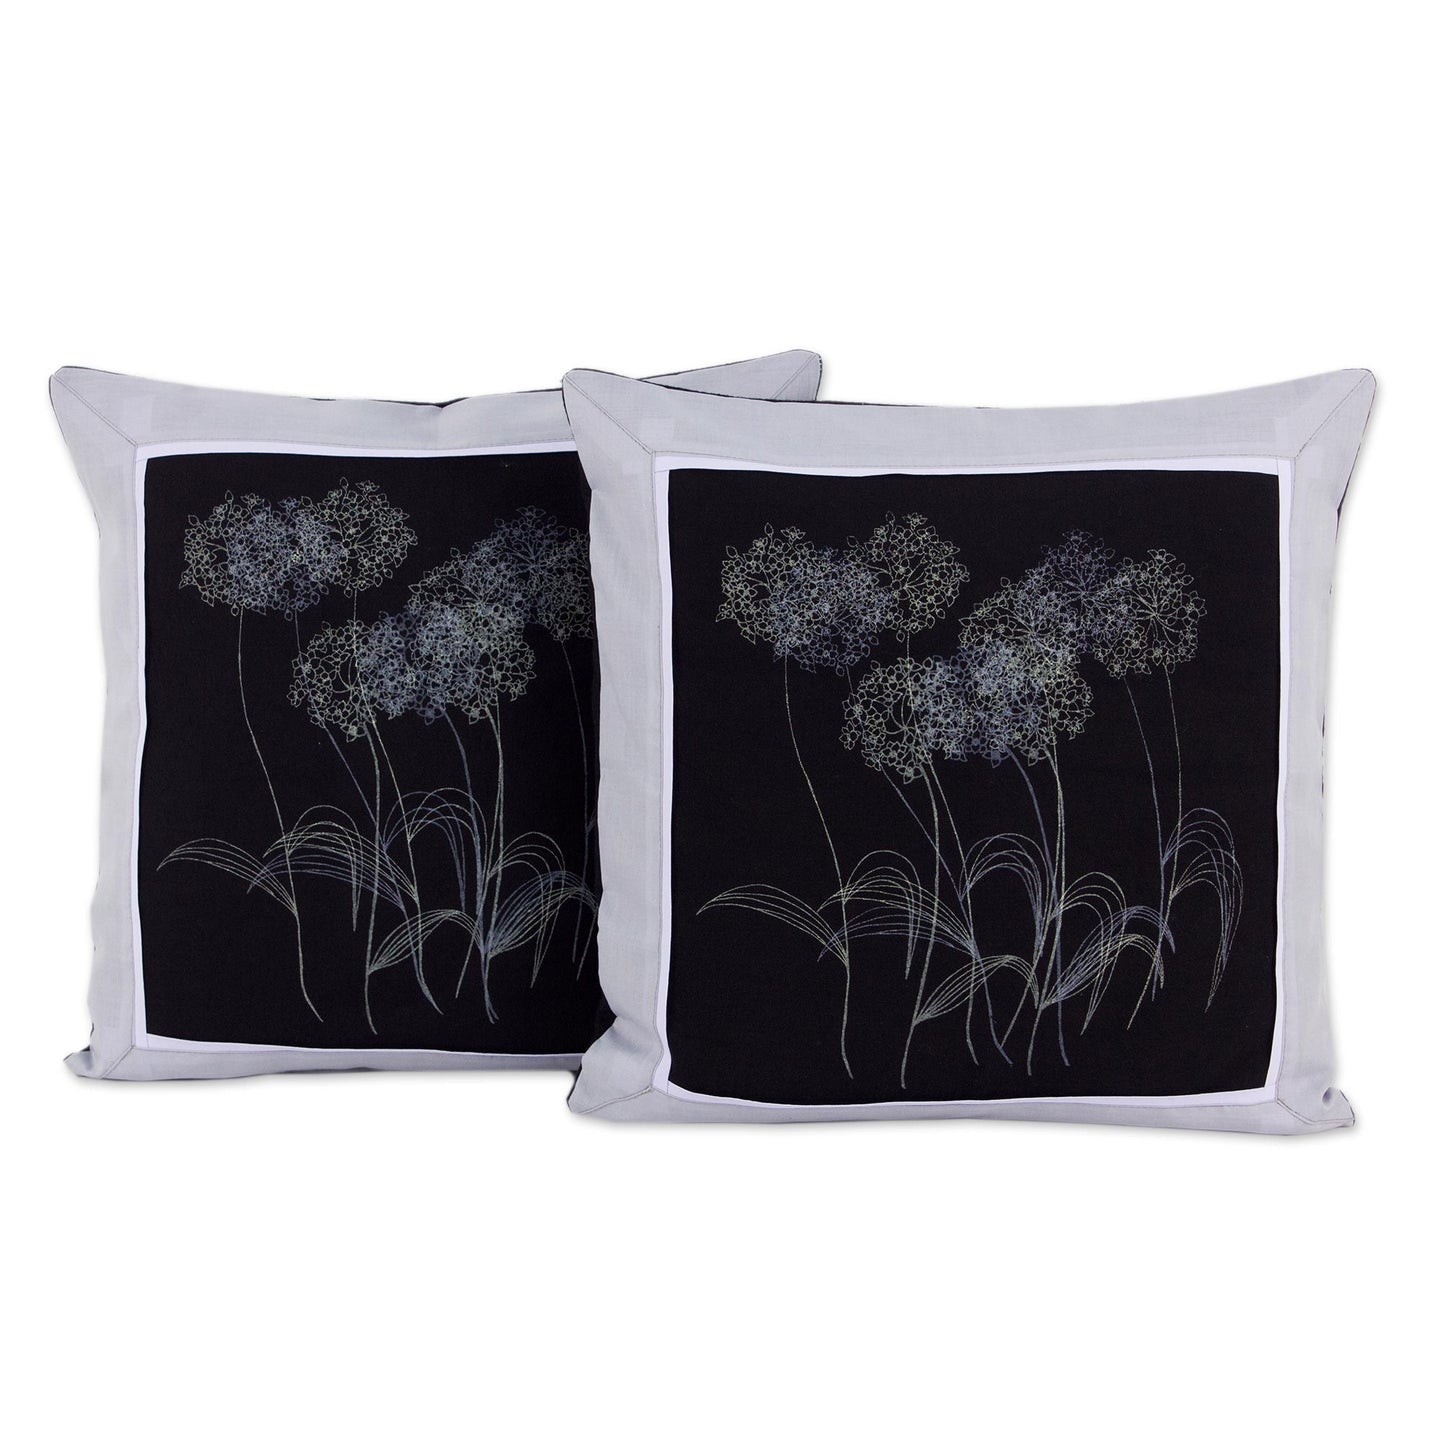 Agapanthus Floral 100% Cotton Floral Cushion Covers from Thailand (Pair)